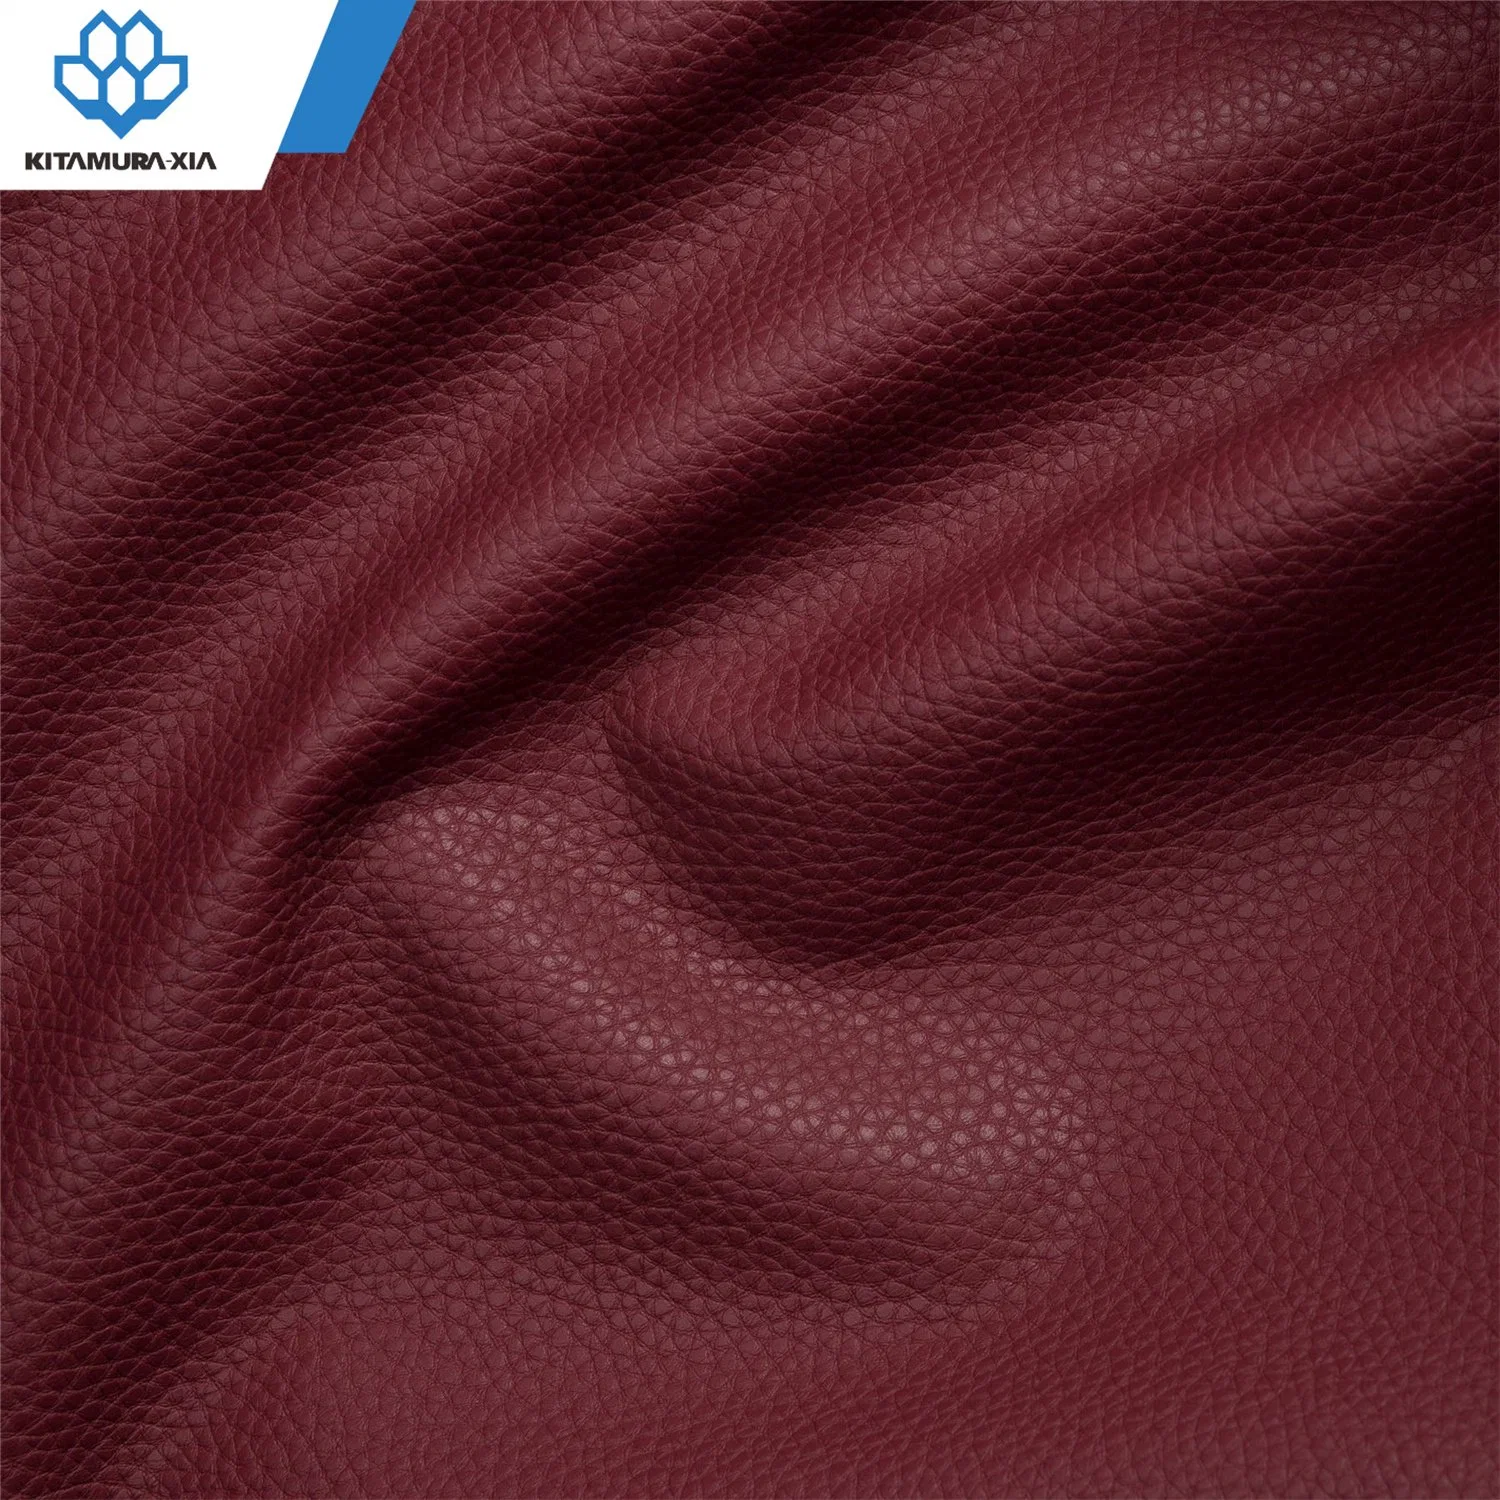 Synthetic Leather Fabric PU Faux Stretch Material for Car Seats Sofa